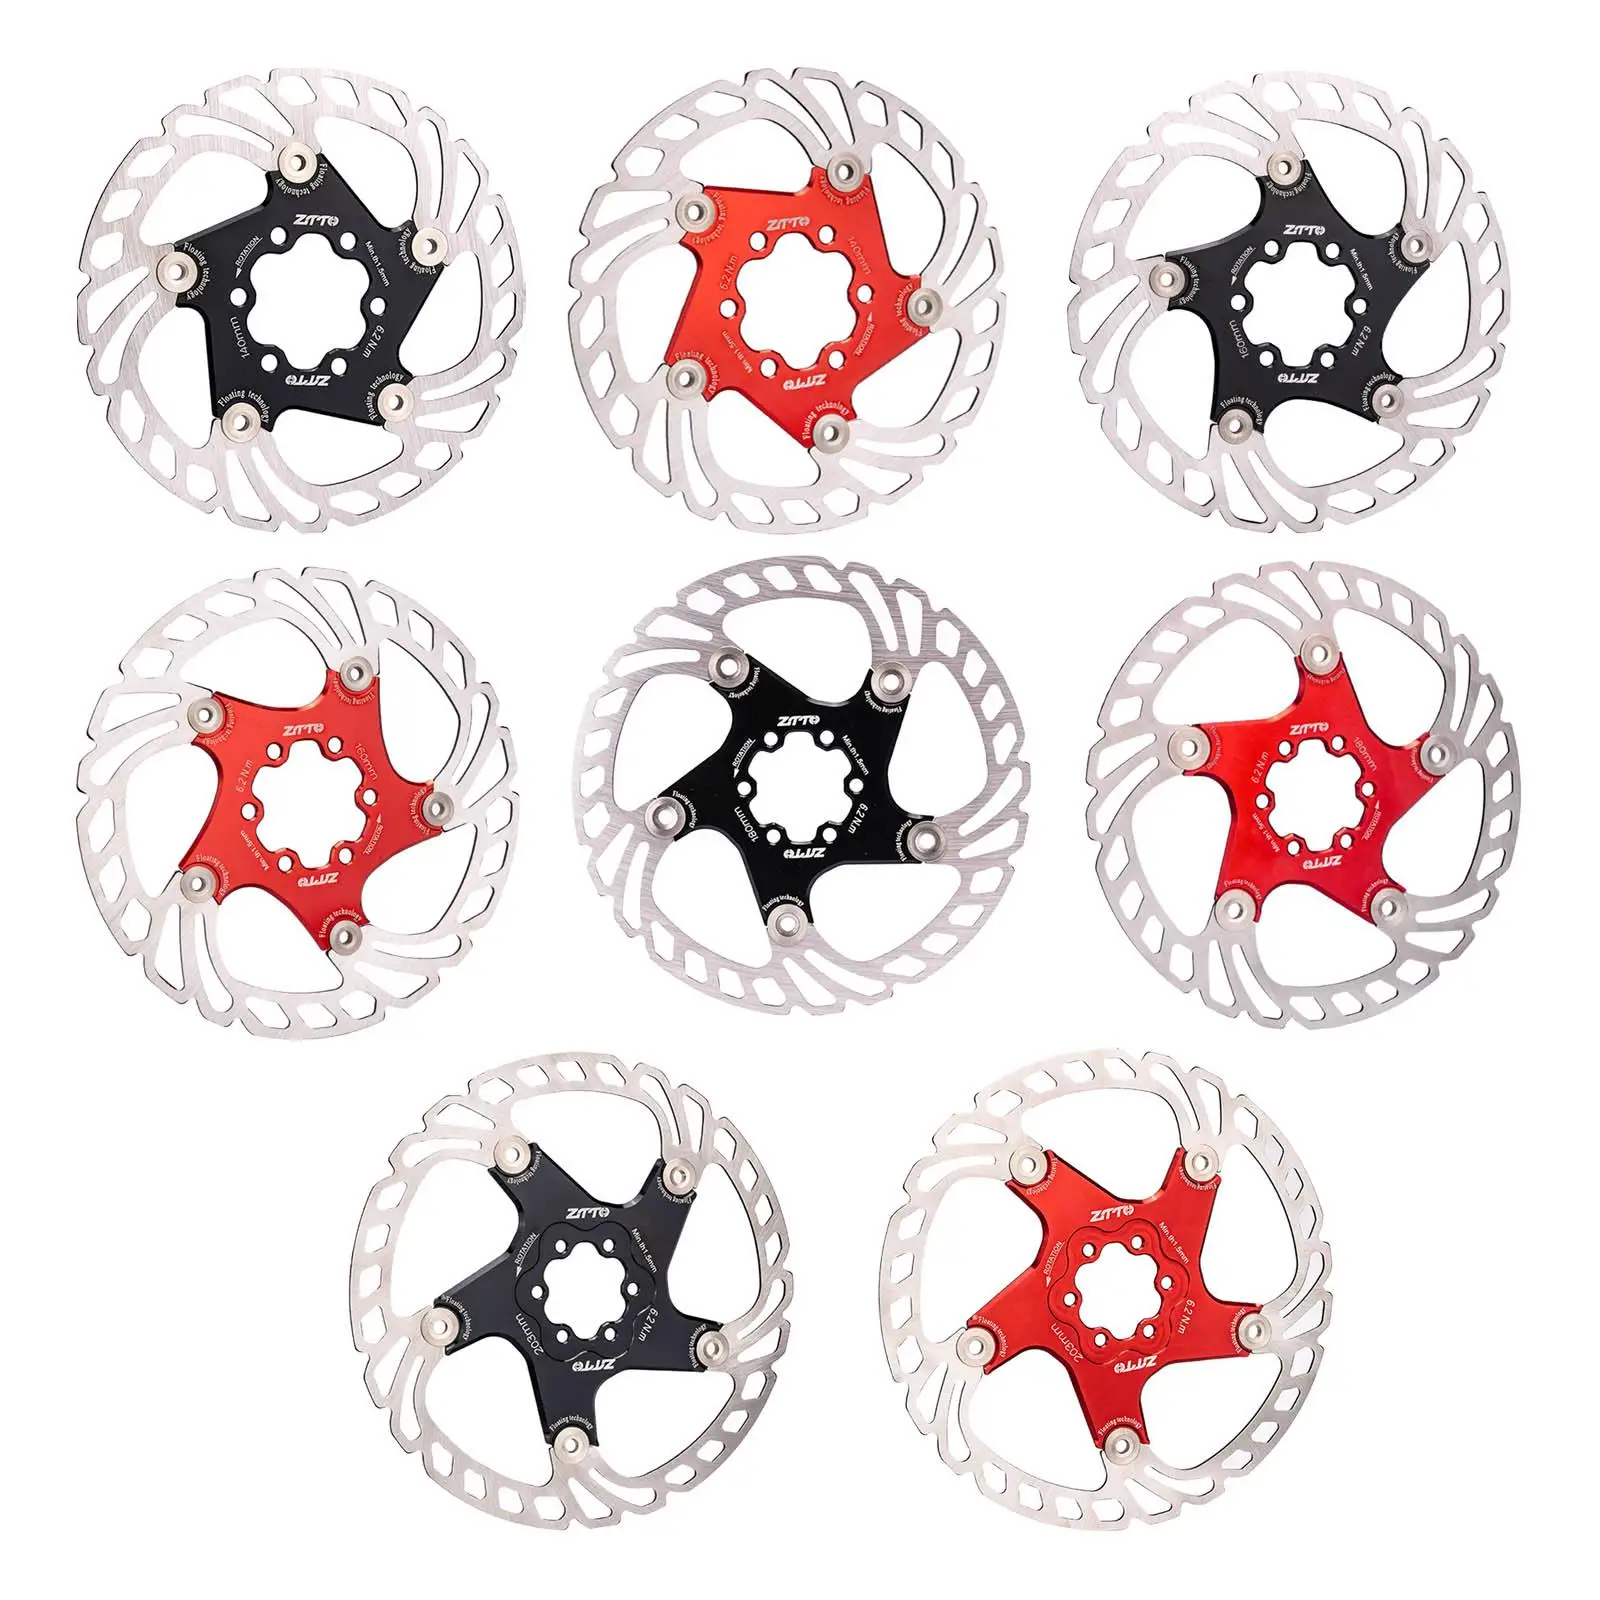 Bike Hydraulic Disc Brake Rotor Stainless Steel Bicycle Brake Disc Floating Disc Brake Pads for MTB BMX Road Cycling Accessories